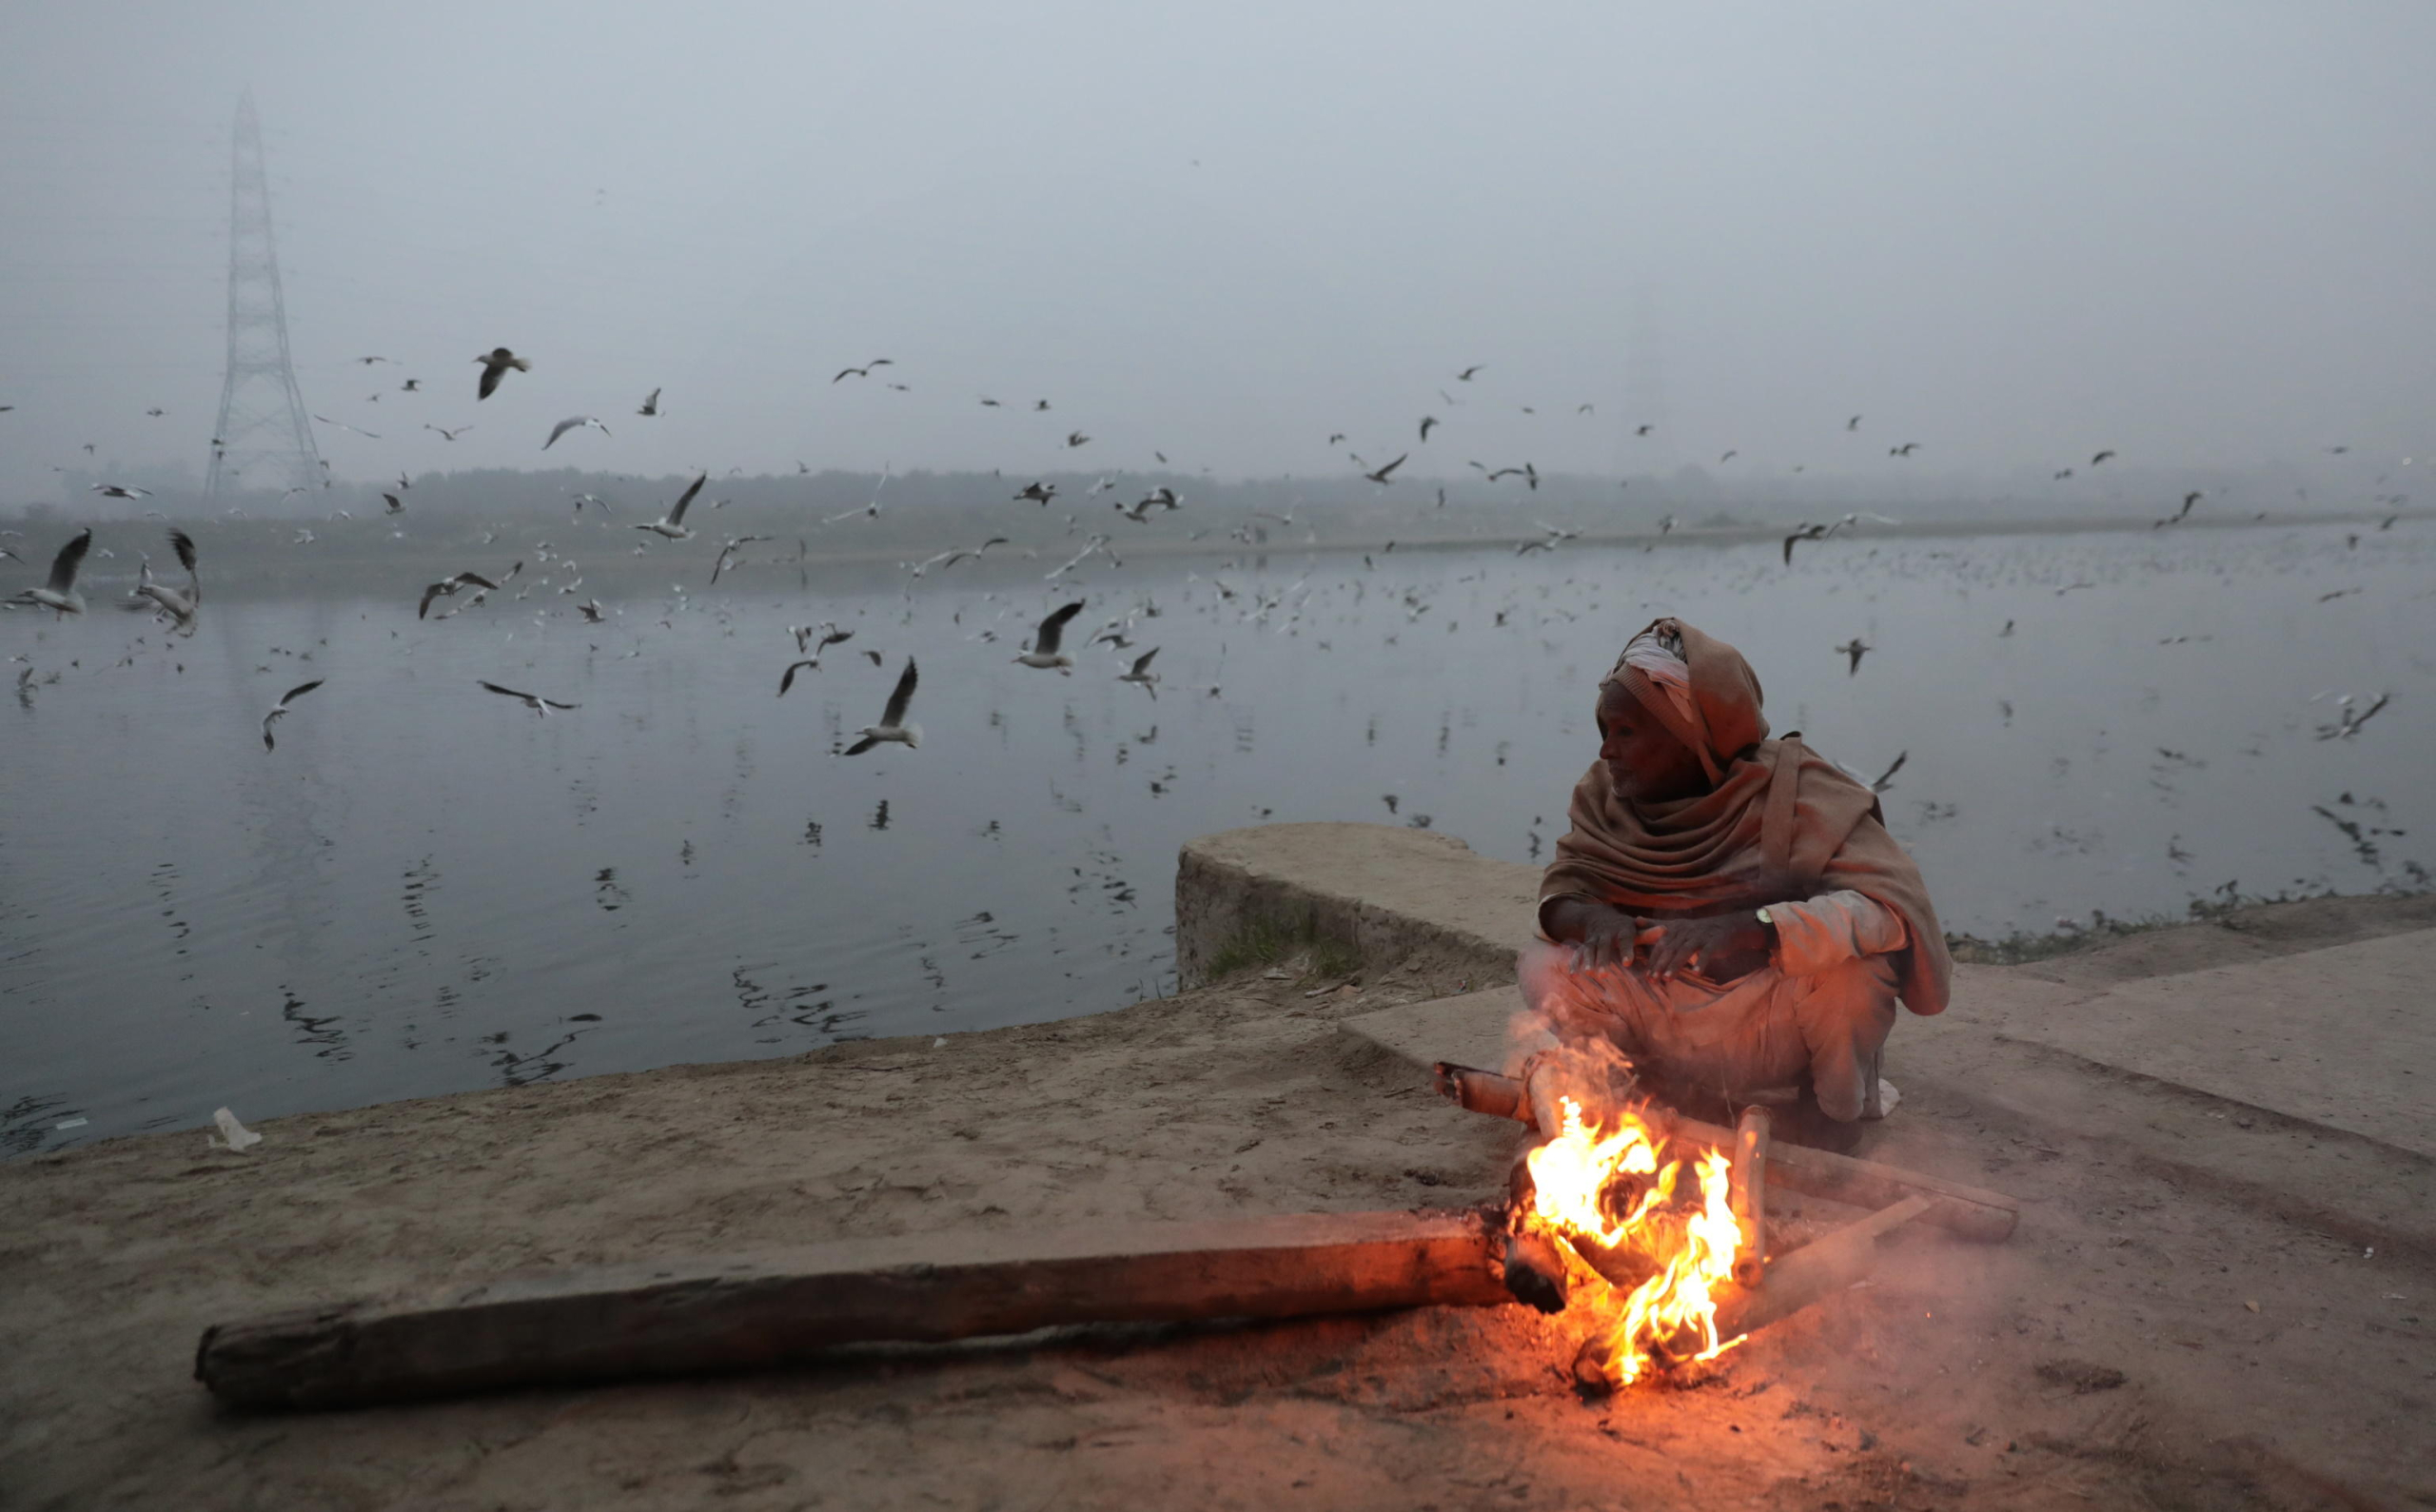 epa11058149 An Indian tries to warm himself near a fire as migratory birds are seen behind him on a foggy, cold winter morning on the banks of the Yamuna river in New Delhi, India, 05 January 2024. Winter takes a heavy toll each year around northern India, as poverty forces many homeless people to live outdoors. Temperatures in the northern Indian regions continue to decrease. Migratory birds, including seagulls, arrive at Delhis Yamuna bank during the onset of winter season as they migrate through Delhi making a temporary home in Yamuna river and sometime fed by devotees who arrive to bathe in the river in the morning time.  EPA/RAJAT GUPTA